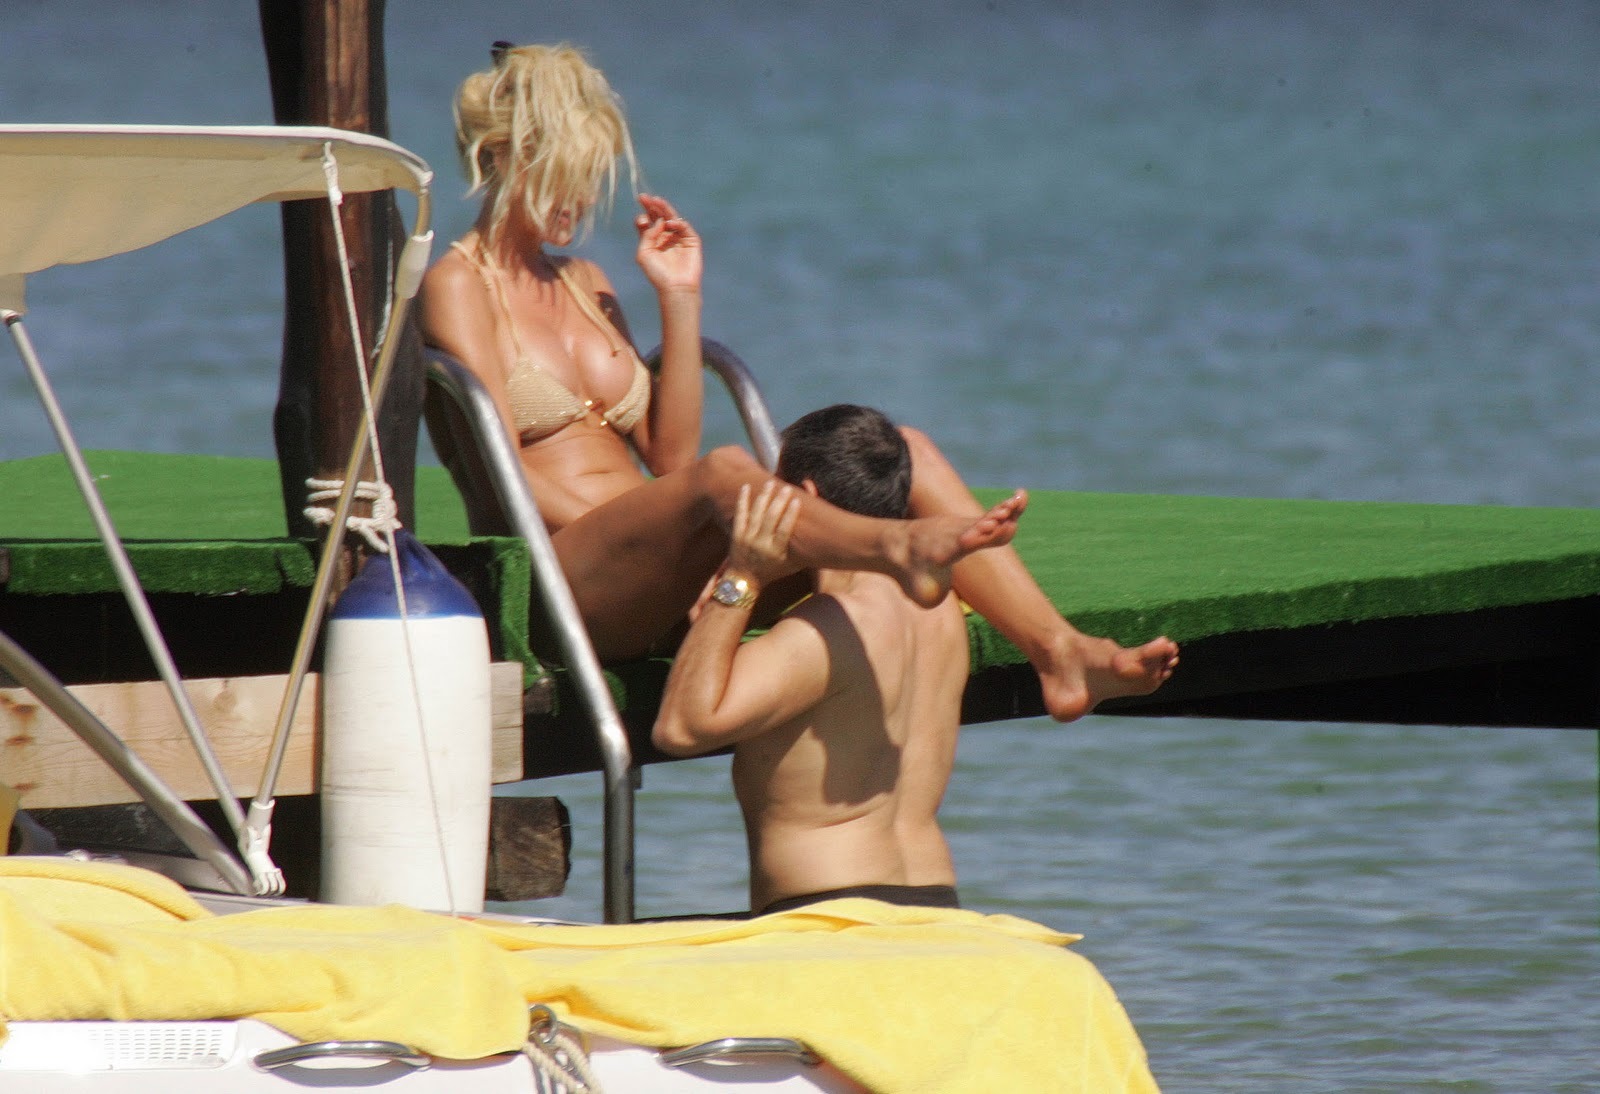 Victoria Silvstedt S Feet